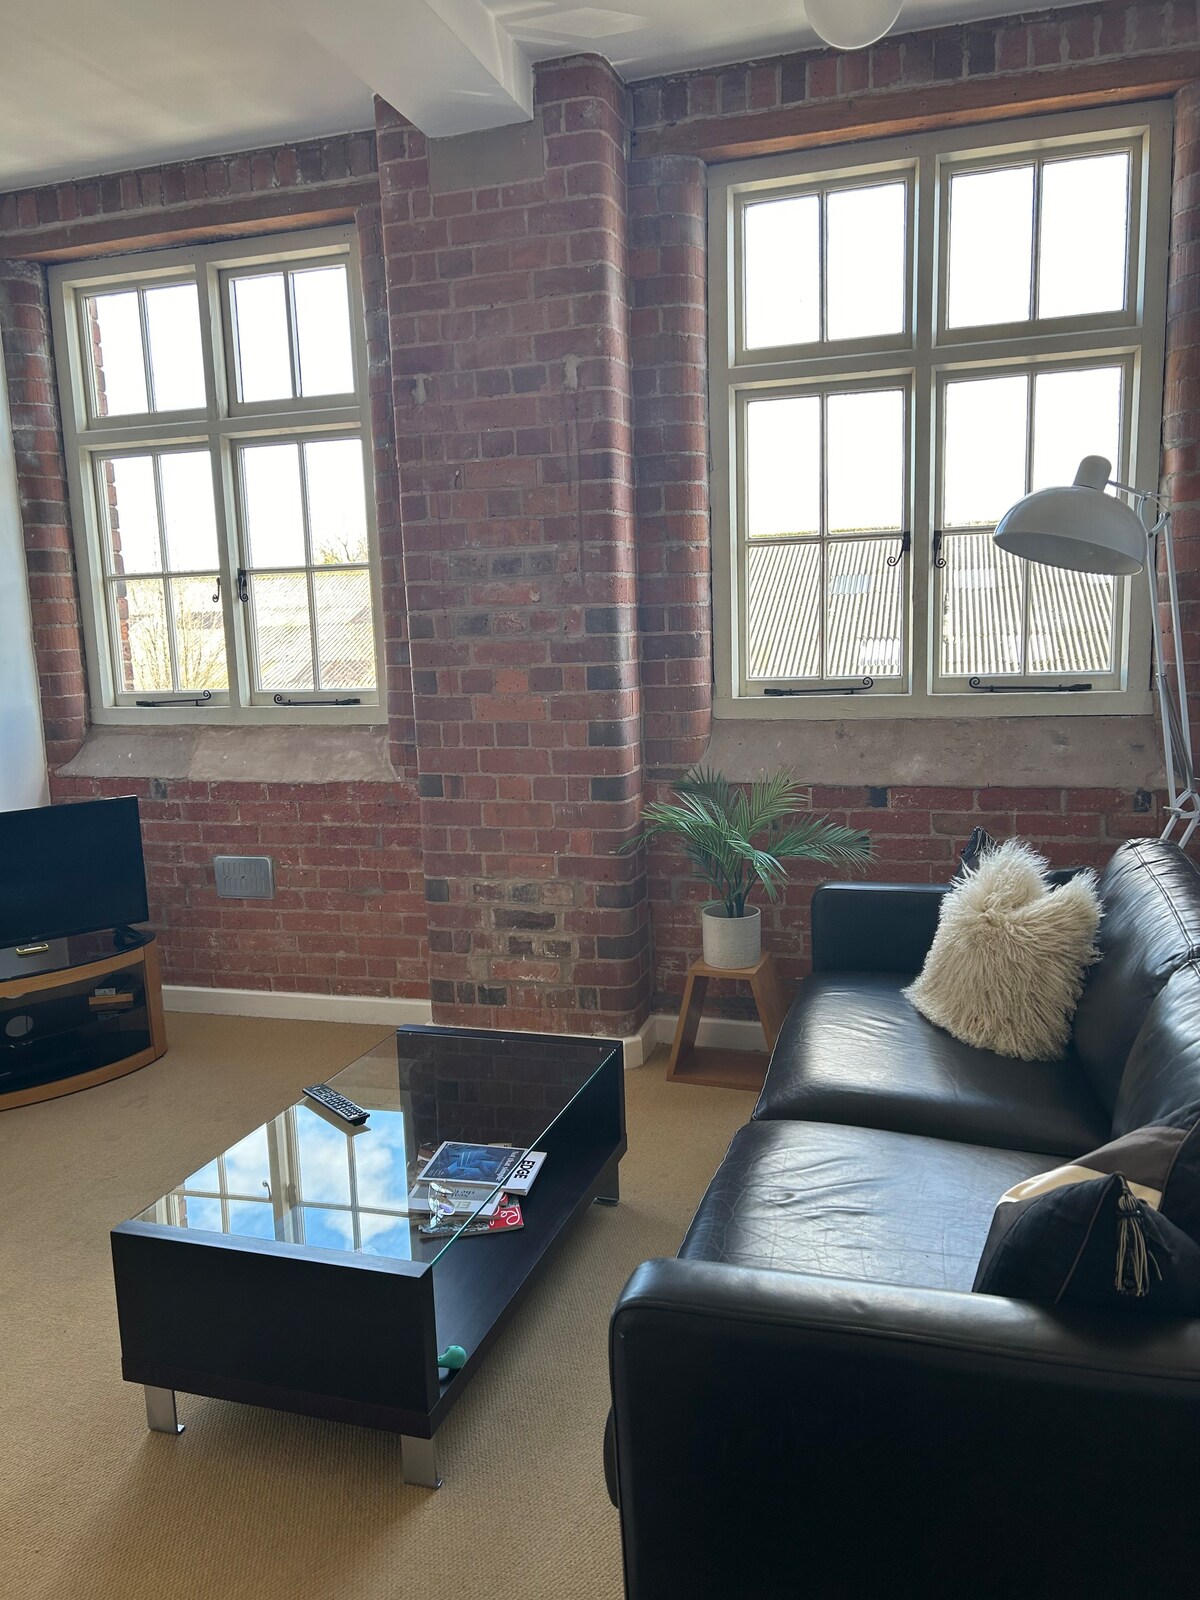 1 bed flat - 2 mins walk from town w. free parking